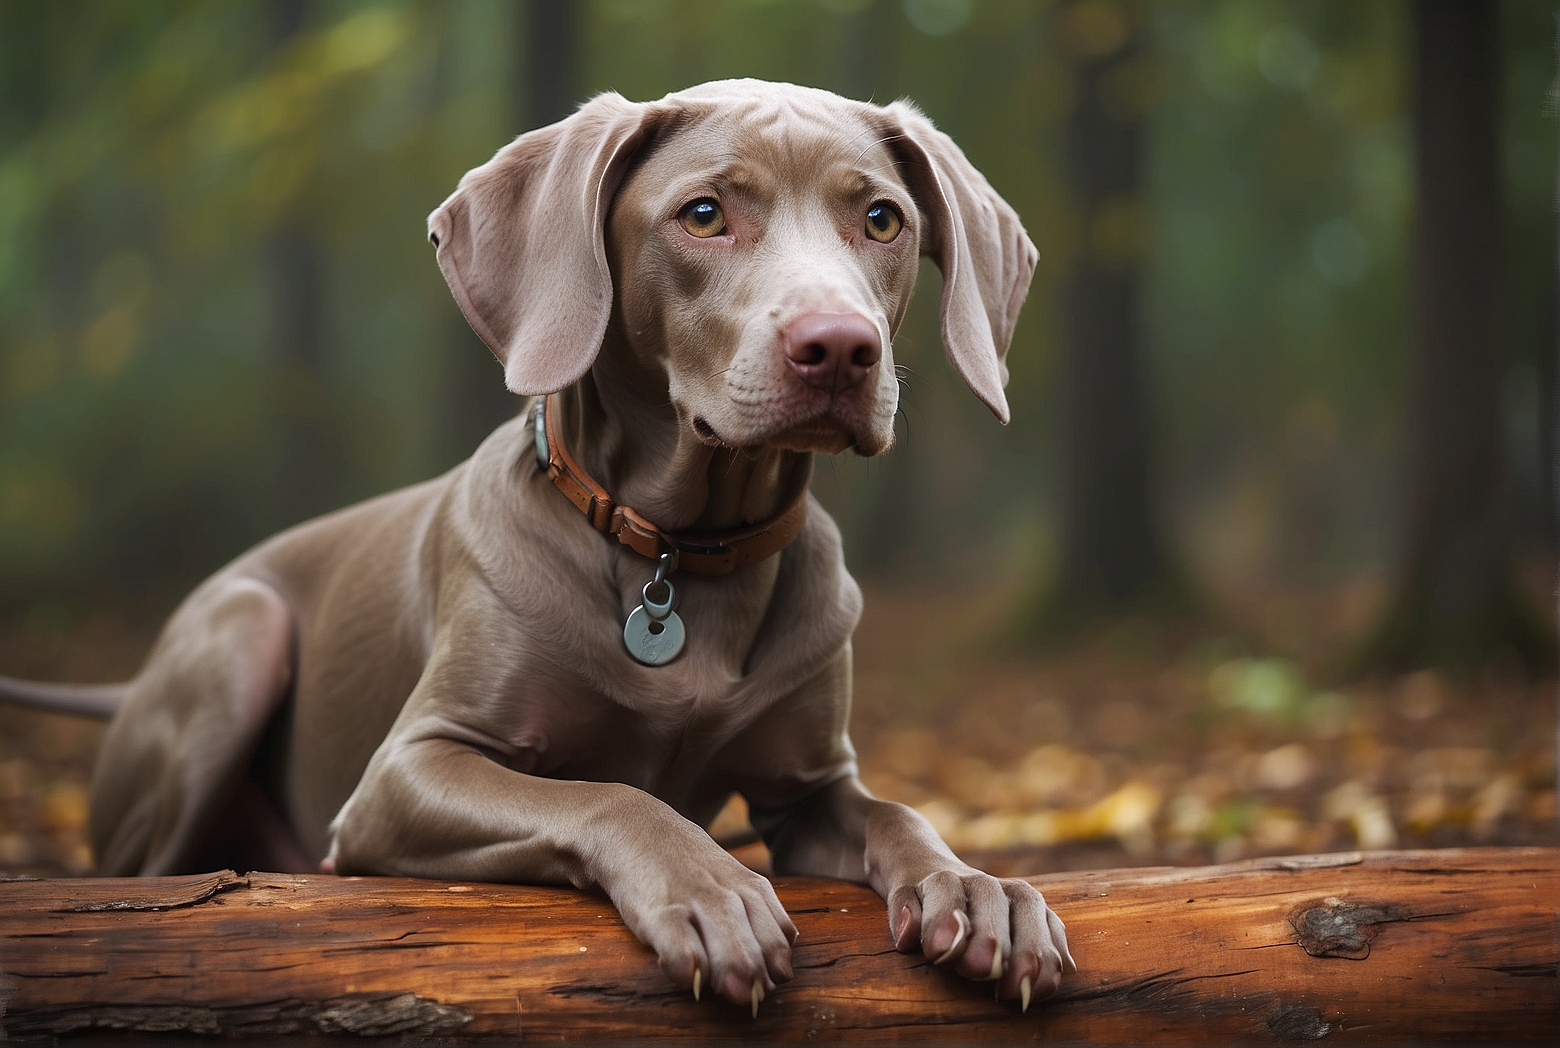 How Many Breeds of Weimaraner Are There?